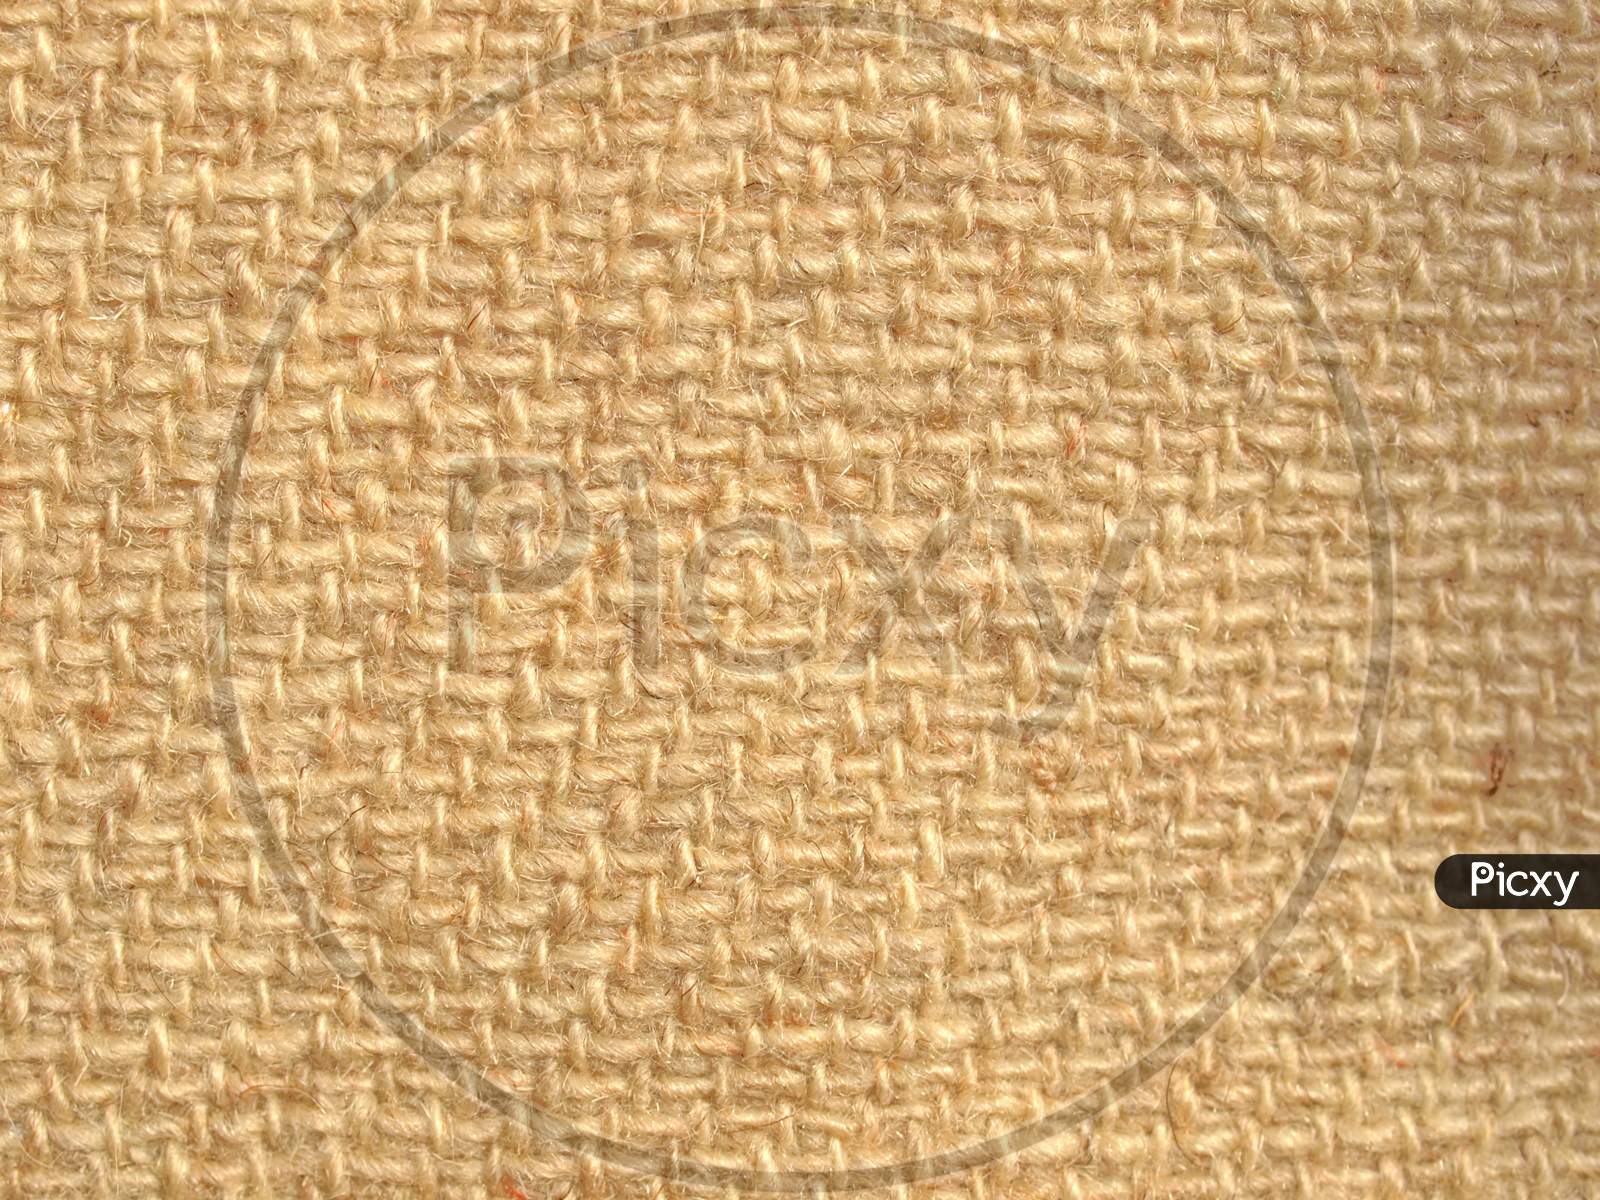 Wool Fabric Texture Useful As A Background